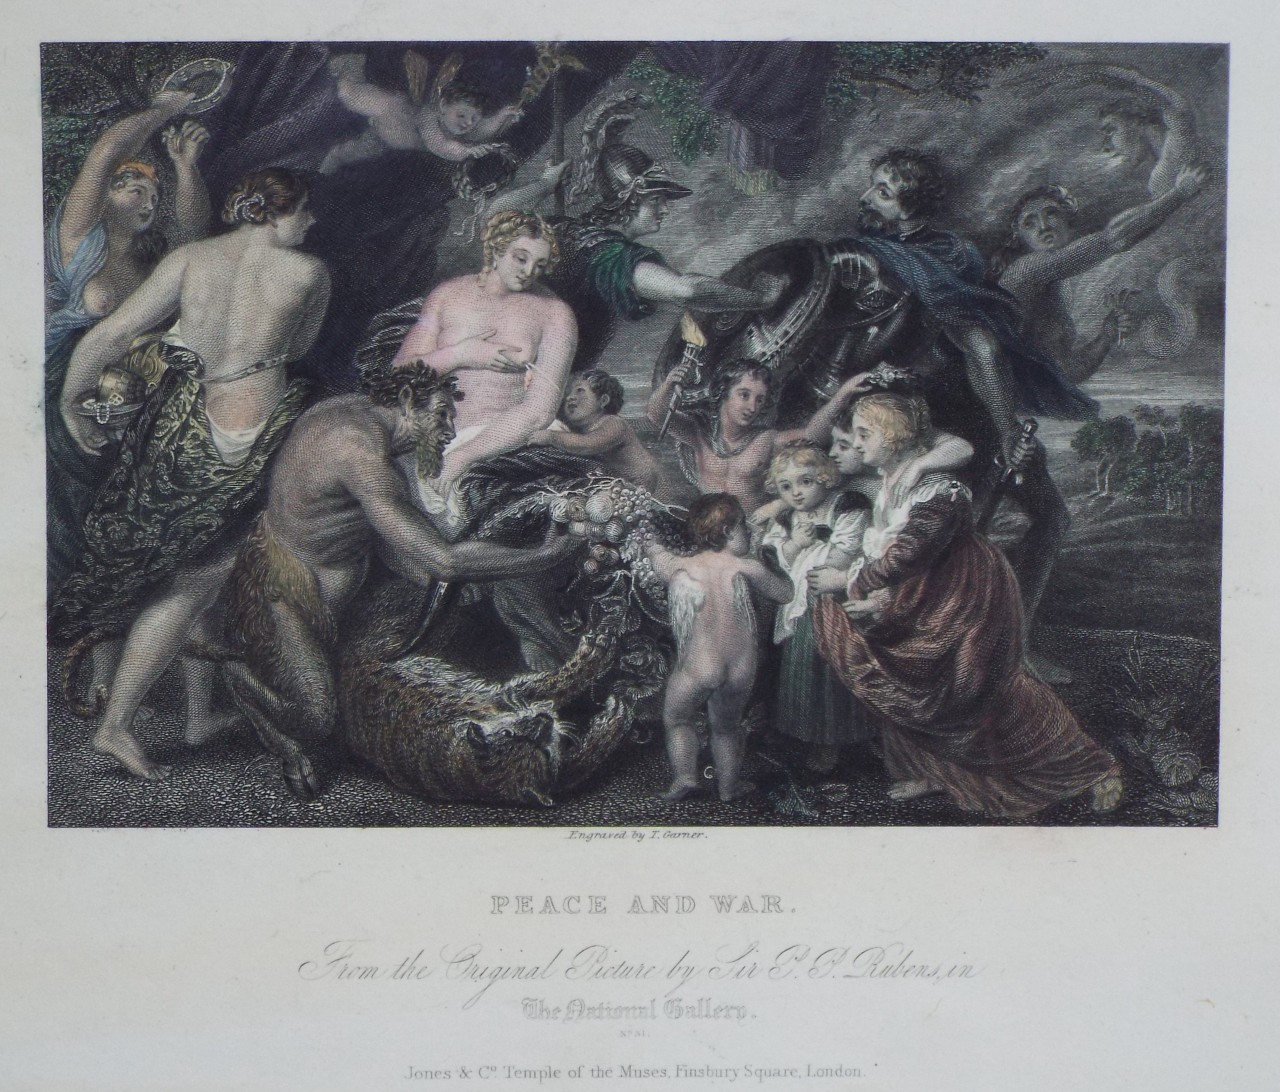 Print - Peace and War. From the Original Picture by Sir P. P. Rubens, in the National Gallery. - Garner